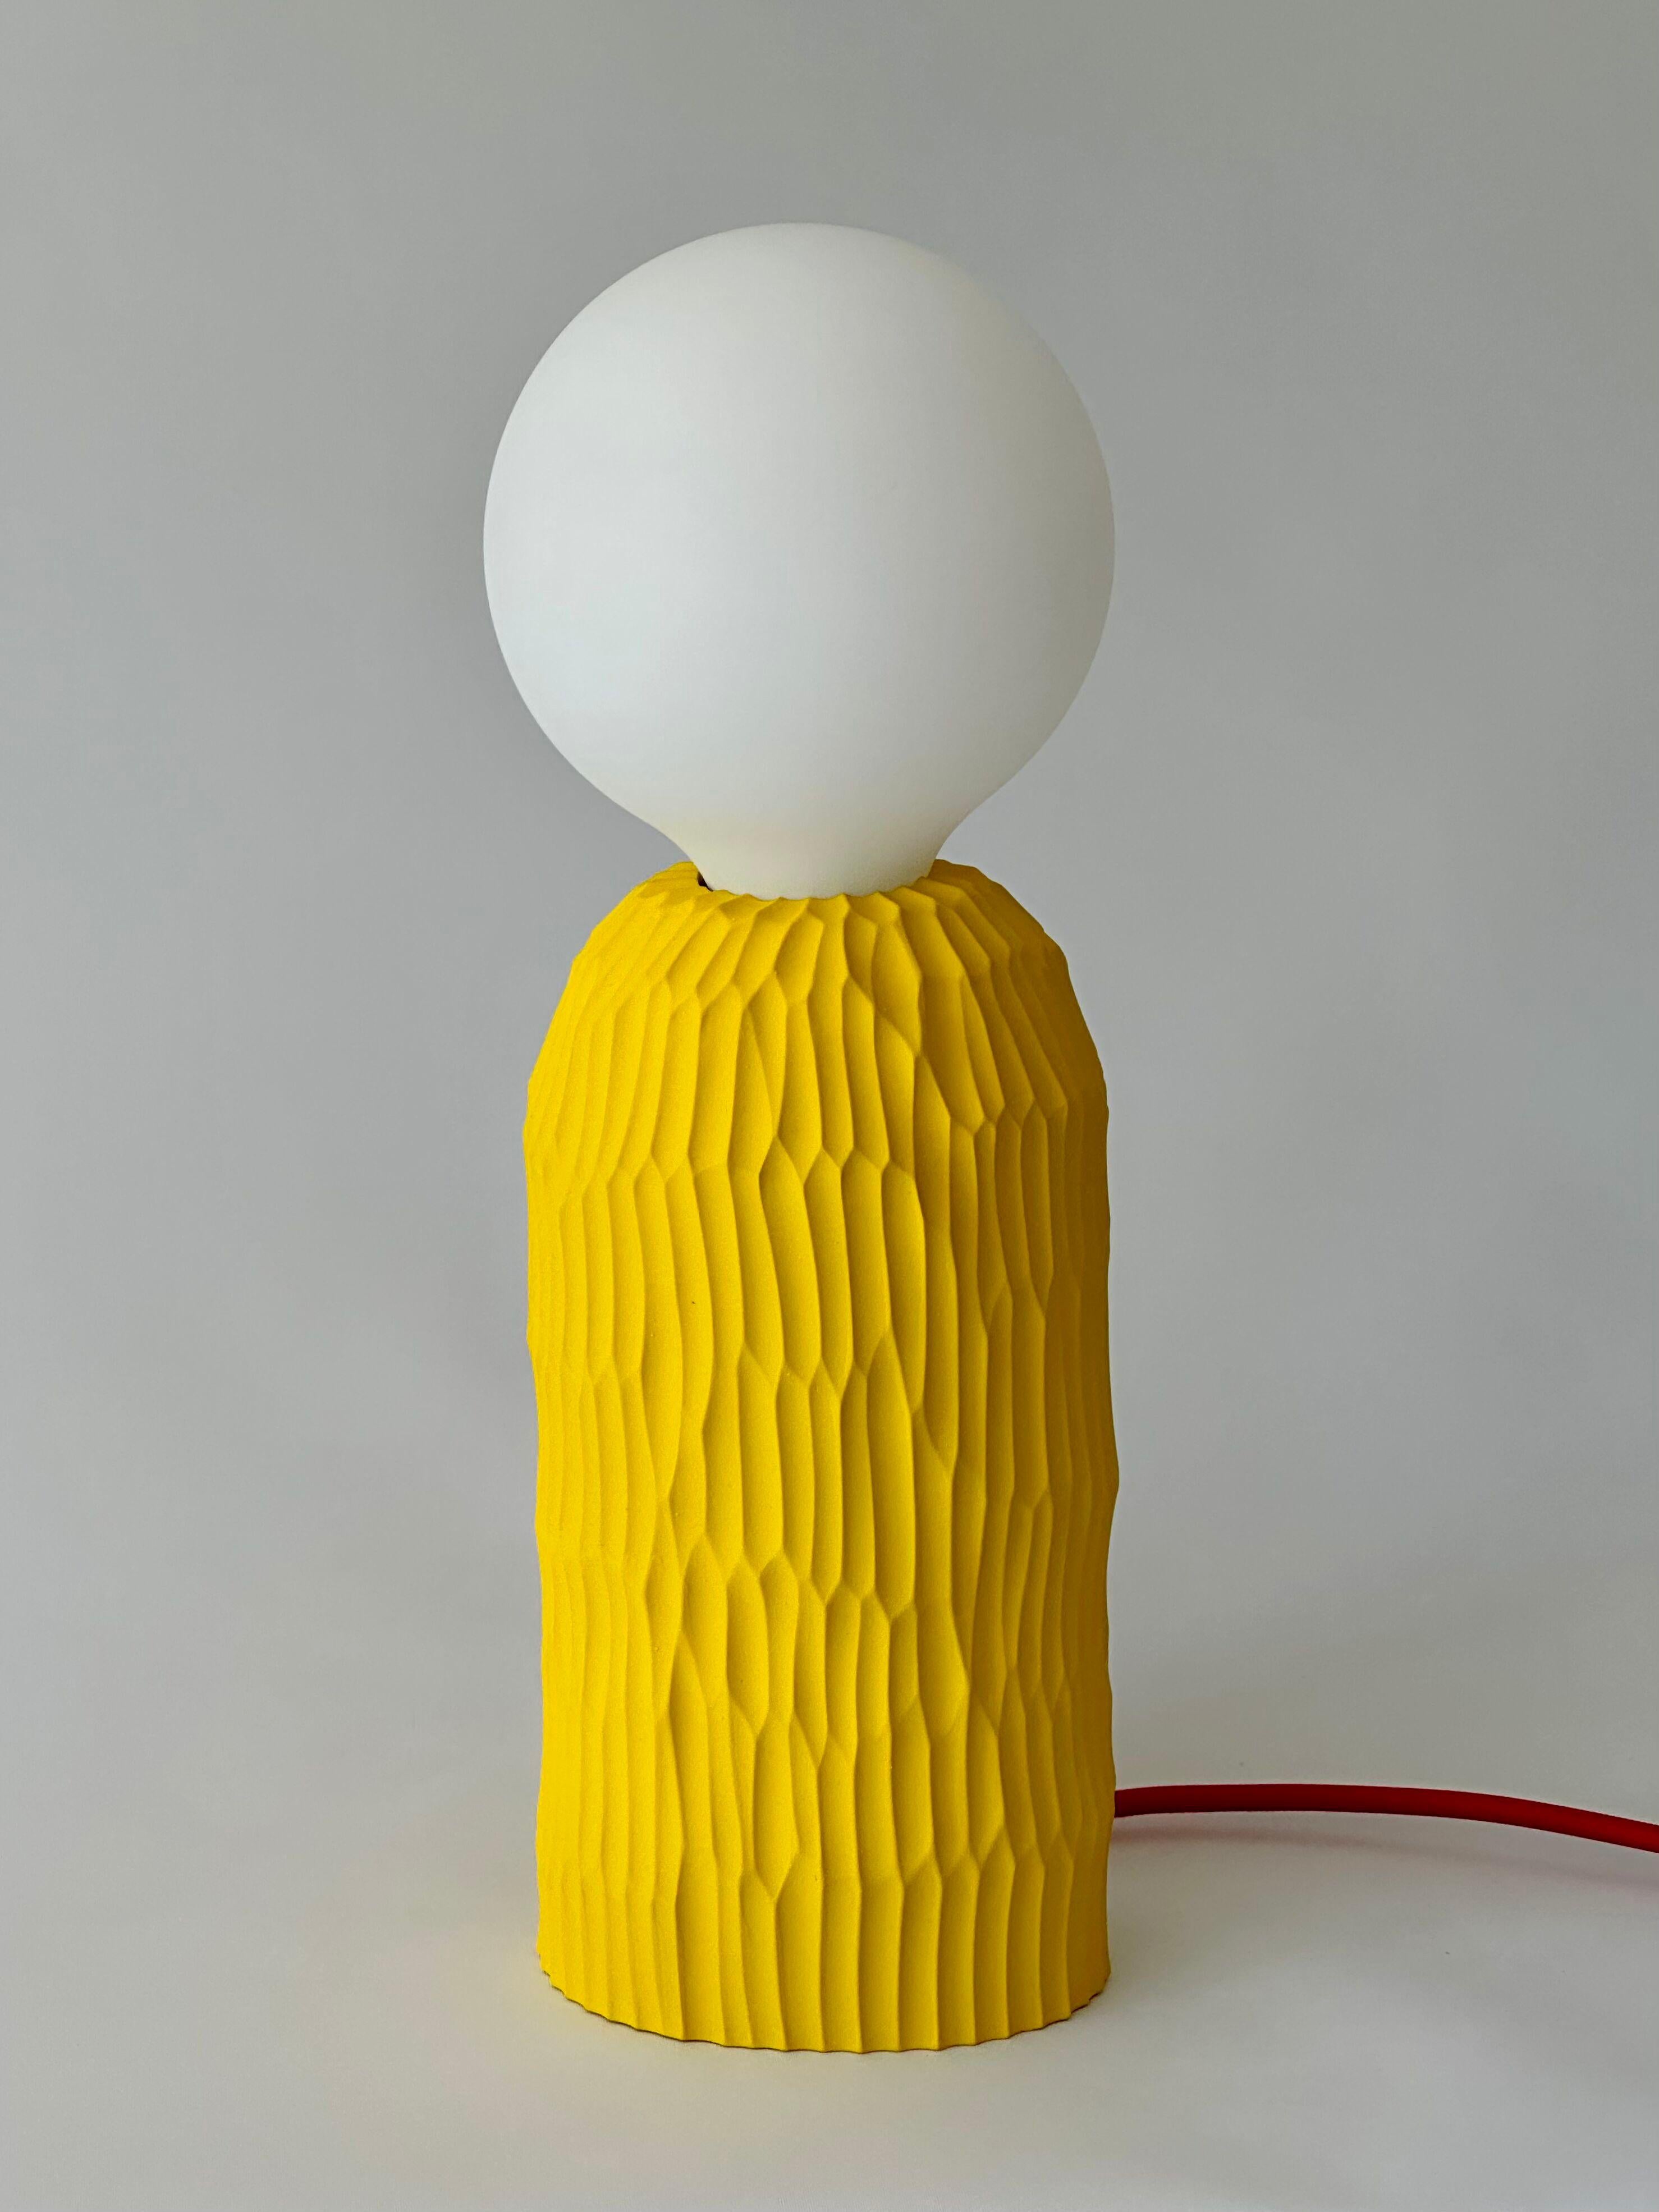 The lamp is a simple and minimalist hand formed ceramic table lamp without a lampshade. Its unique textural base is hand carved in a signature design, with a distinct natural grain from its clay origins.

It has been designed to create a unique